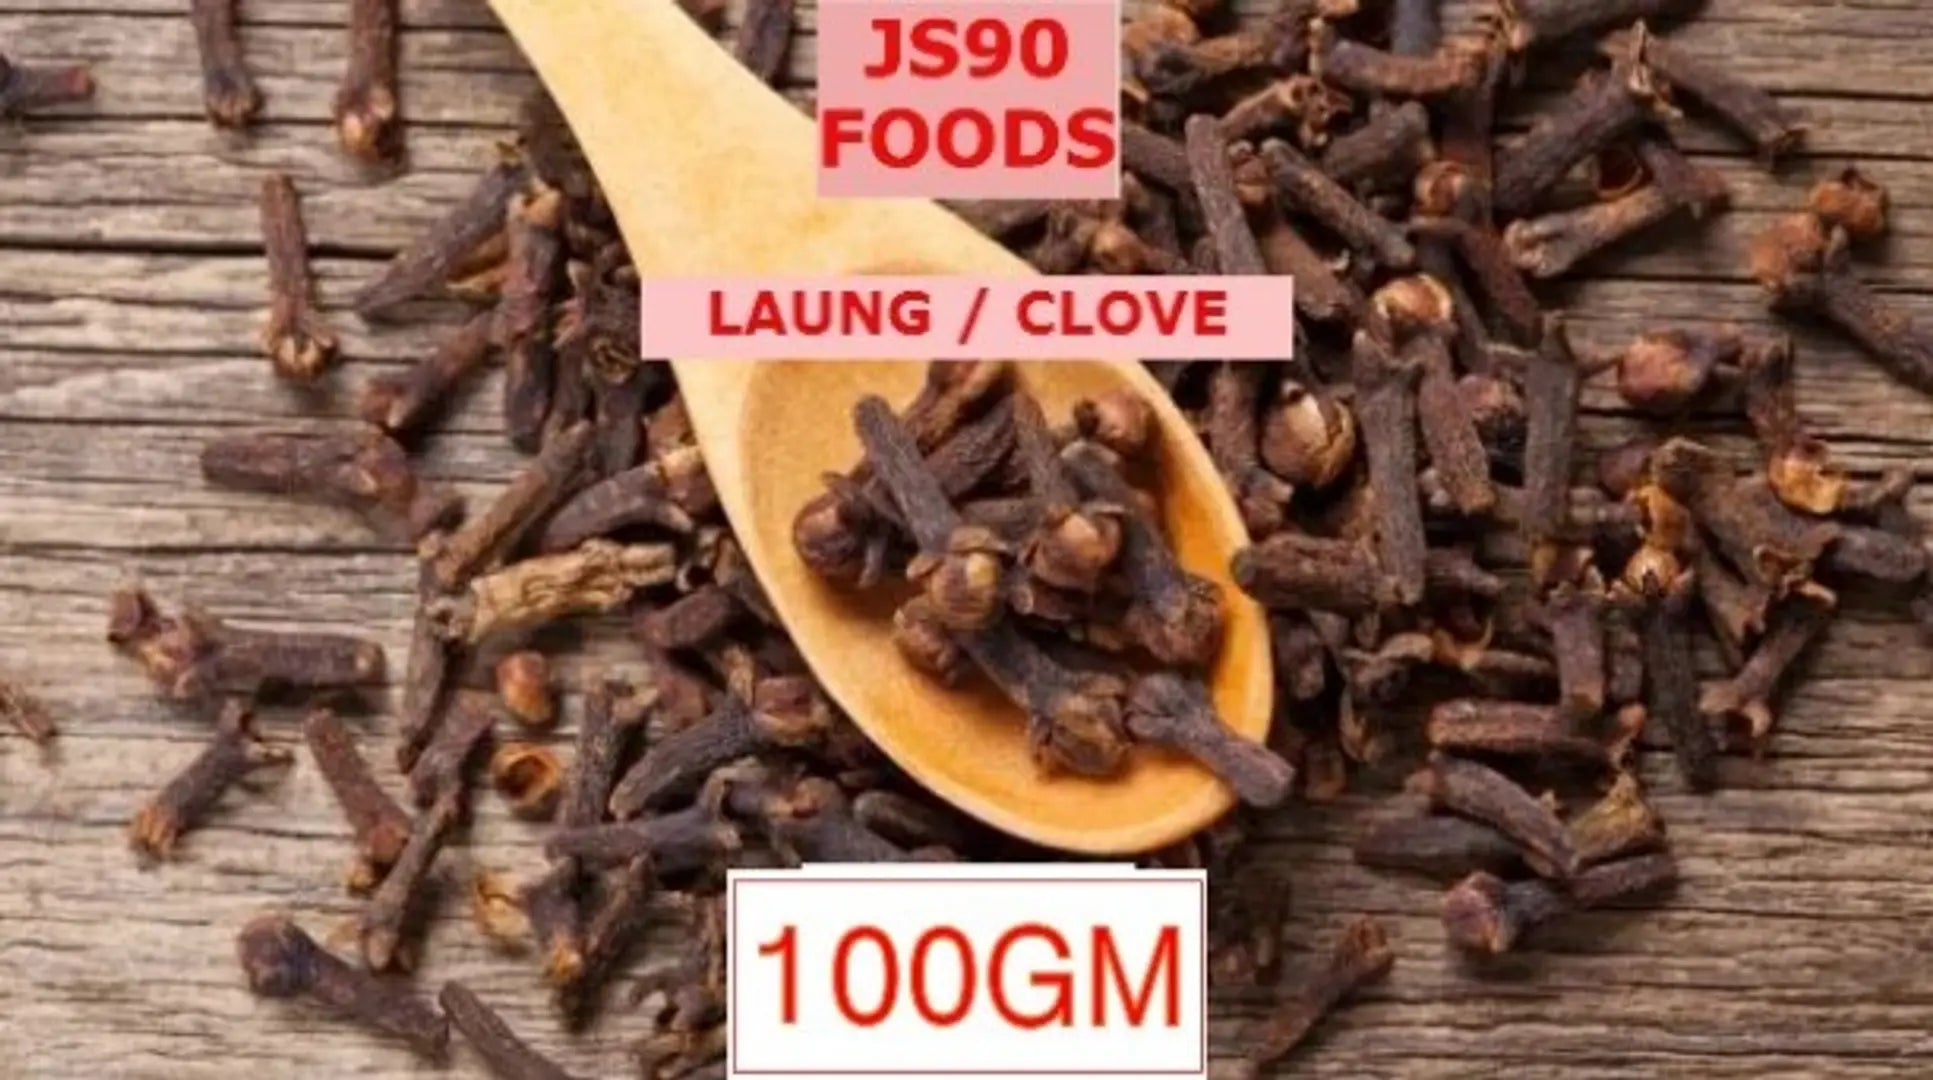 100GM Laung Sabut Clove Whole by JS90 FOODS: A Deliciously Flavorful Spice